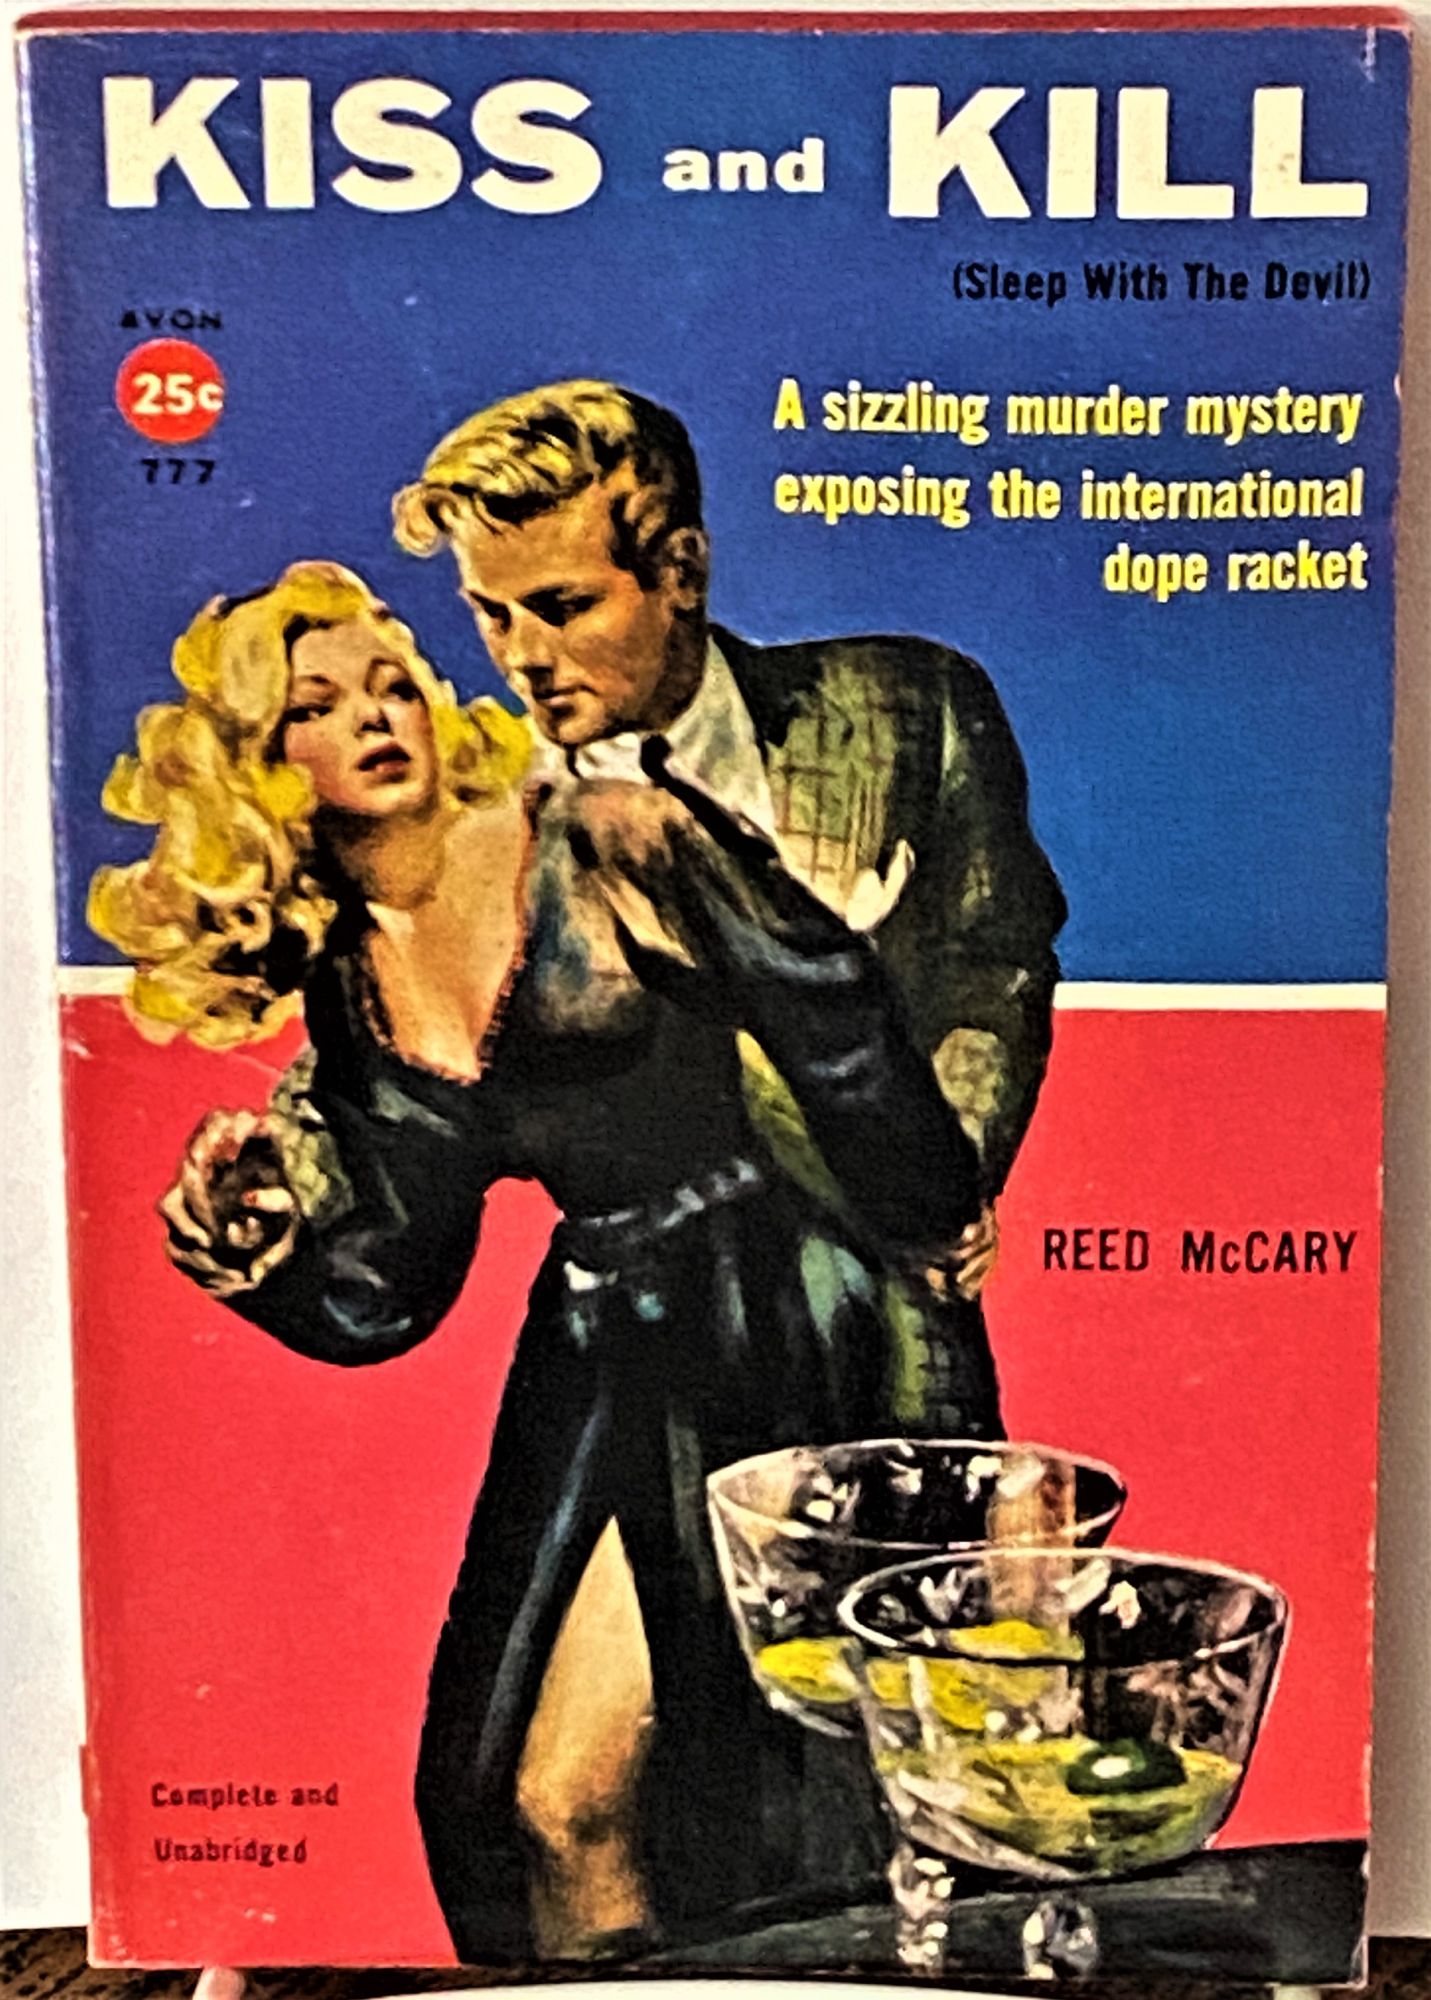 Kiss and Kill (Sleep with the Devil) by Reed McCary: (1957)